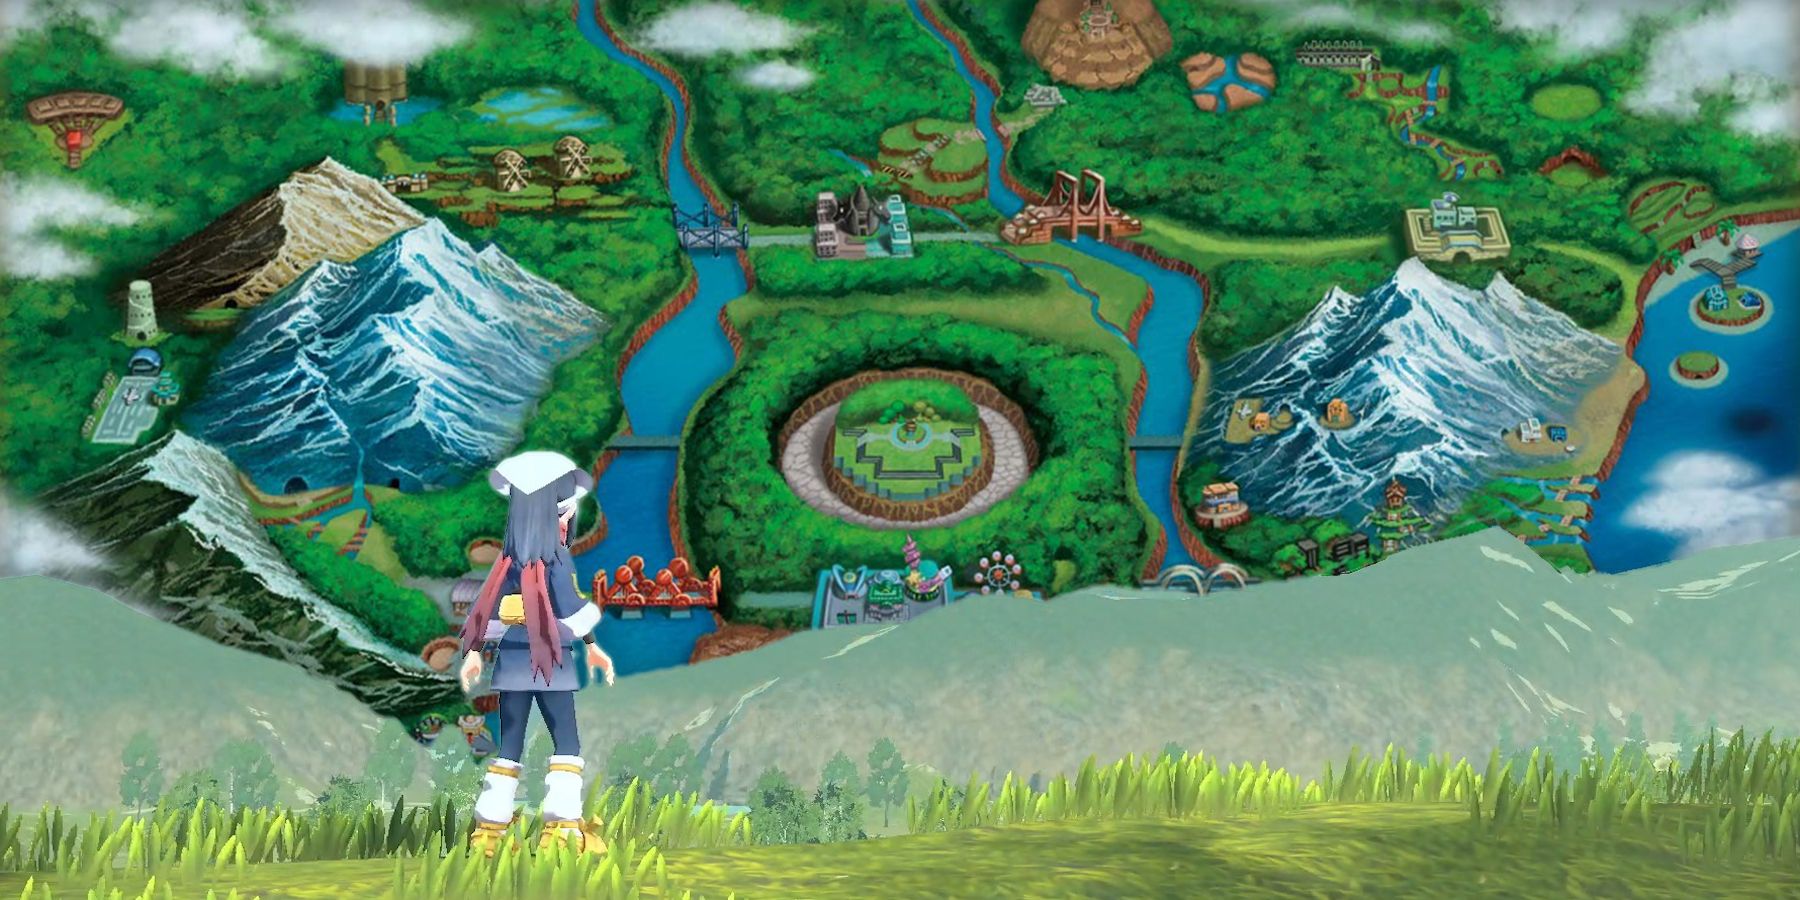 What the Unova Region Could Look Like in a Pokemon Legends Game